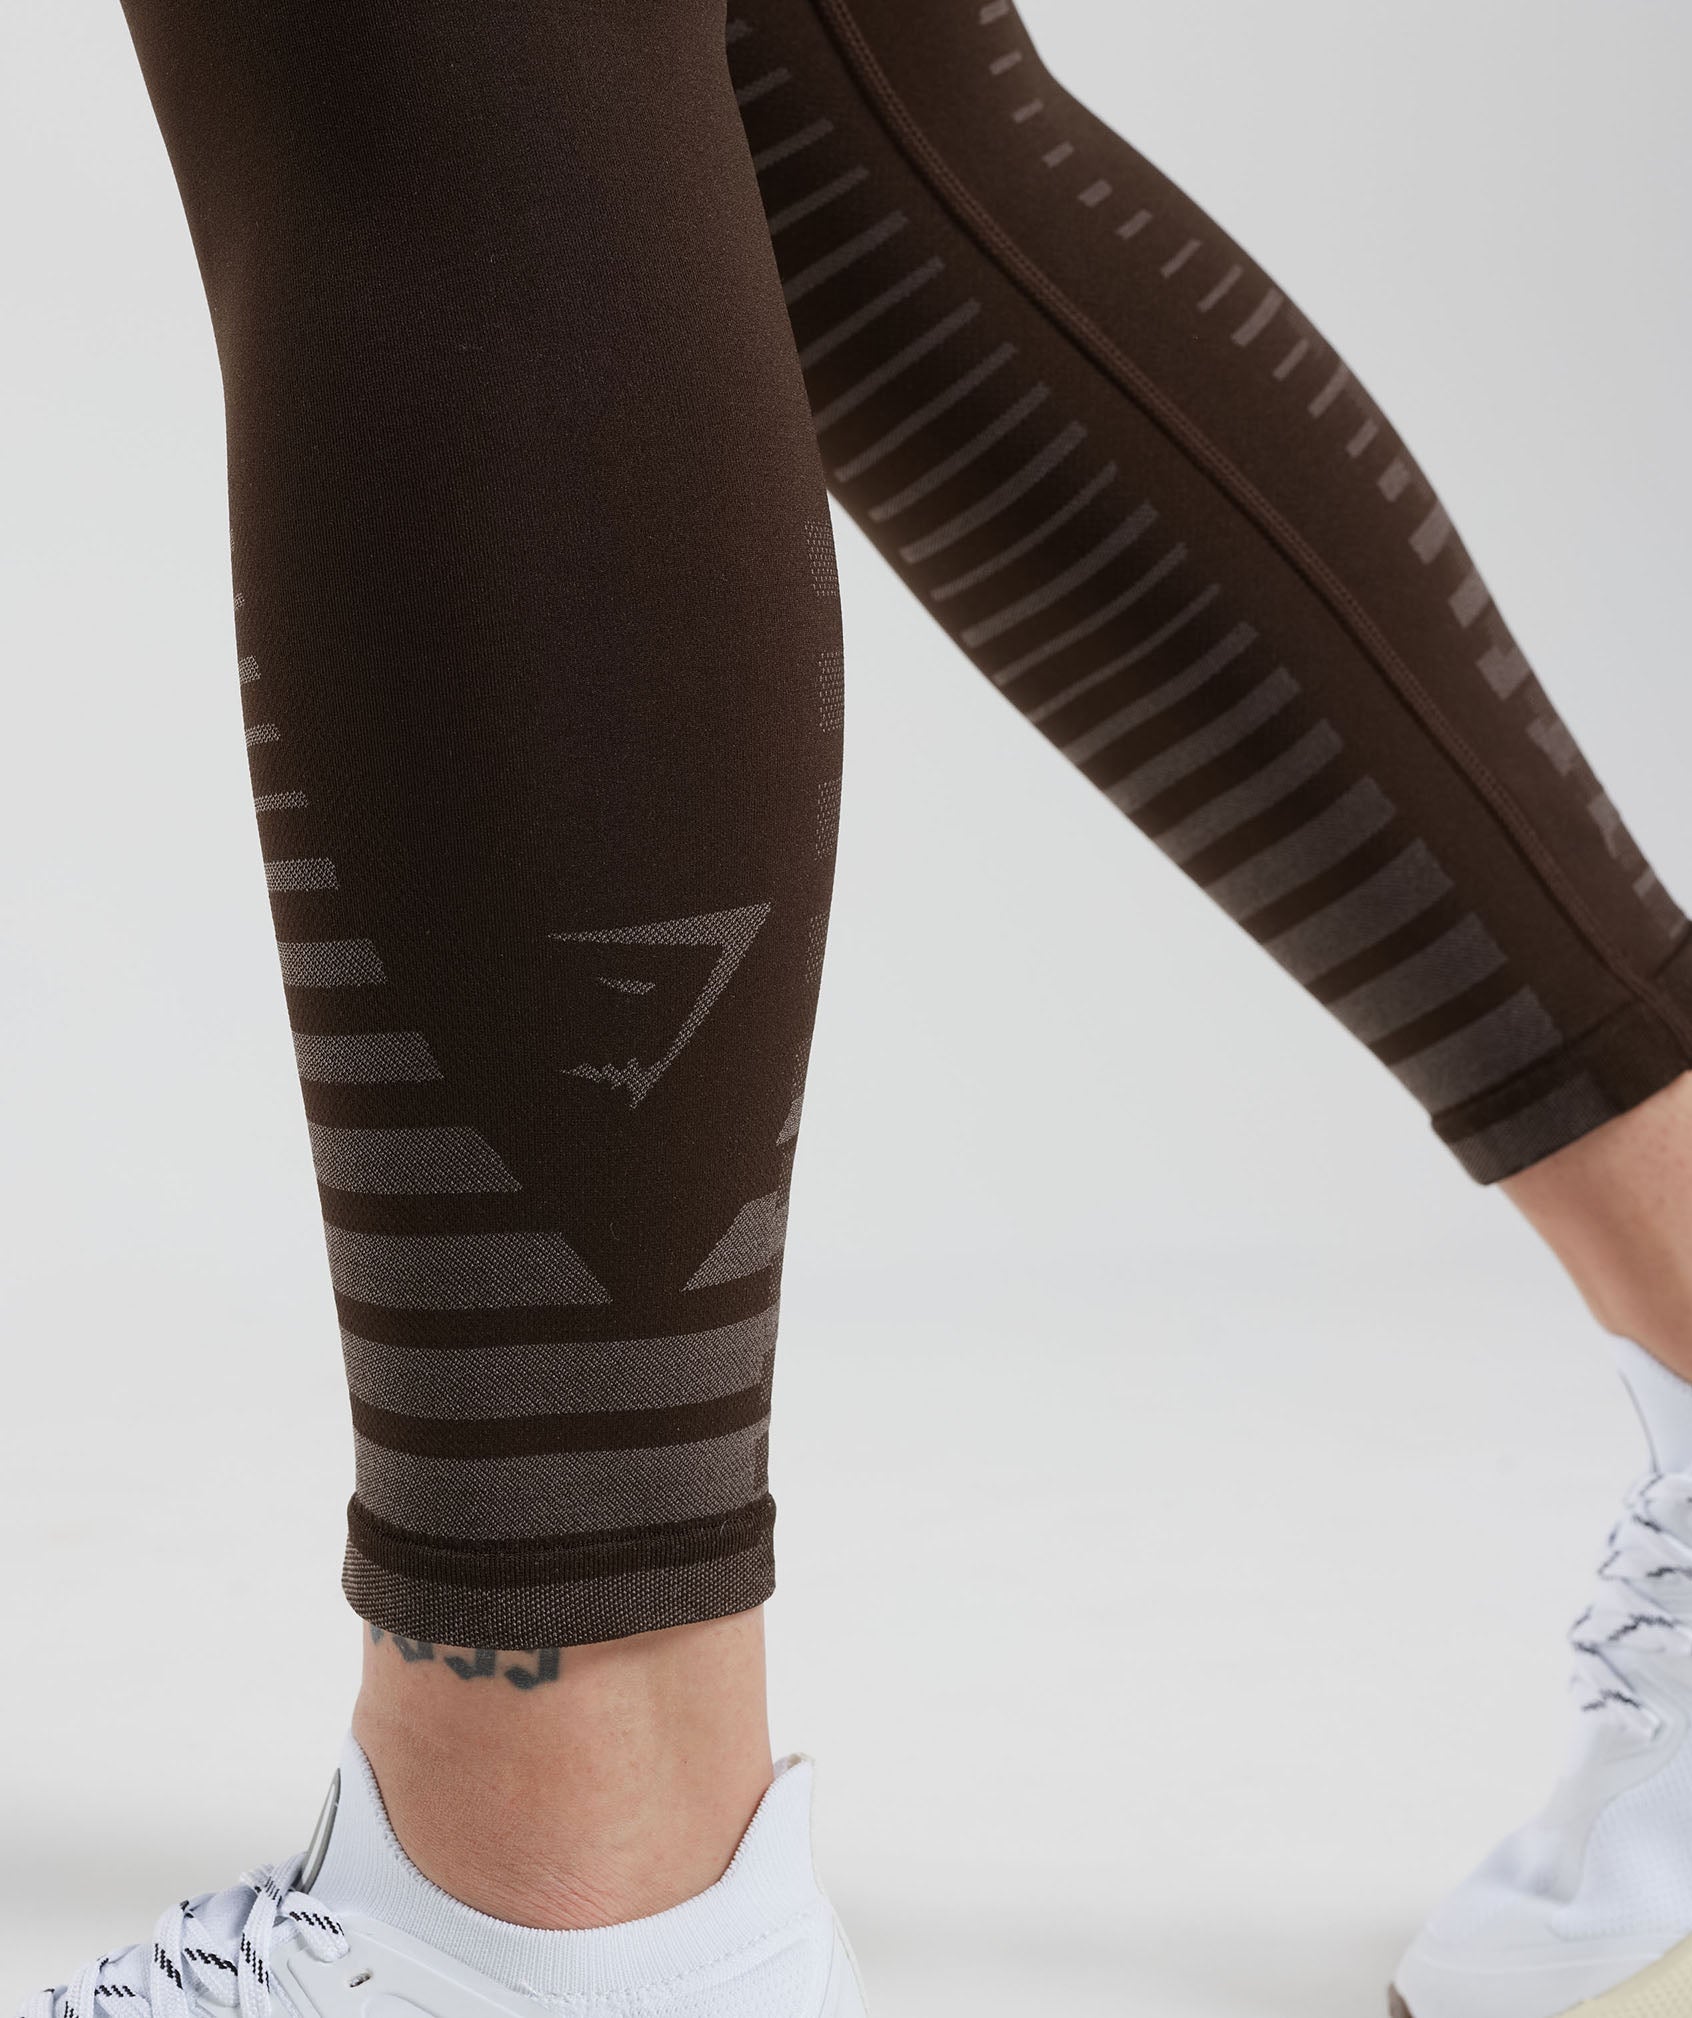 Apex Limit Leggings in Archive Brown/Truffle Brown - view 5